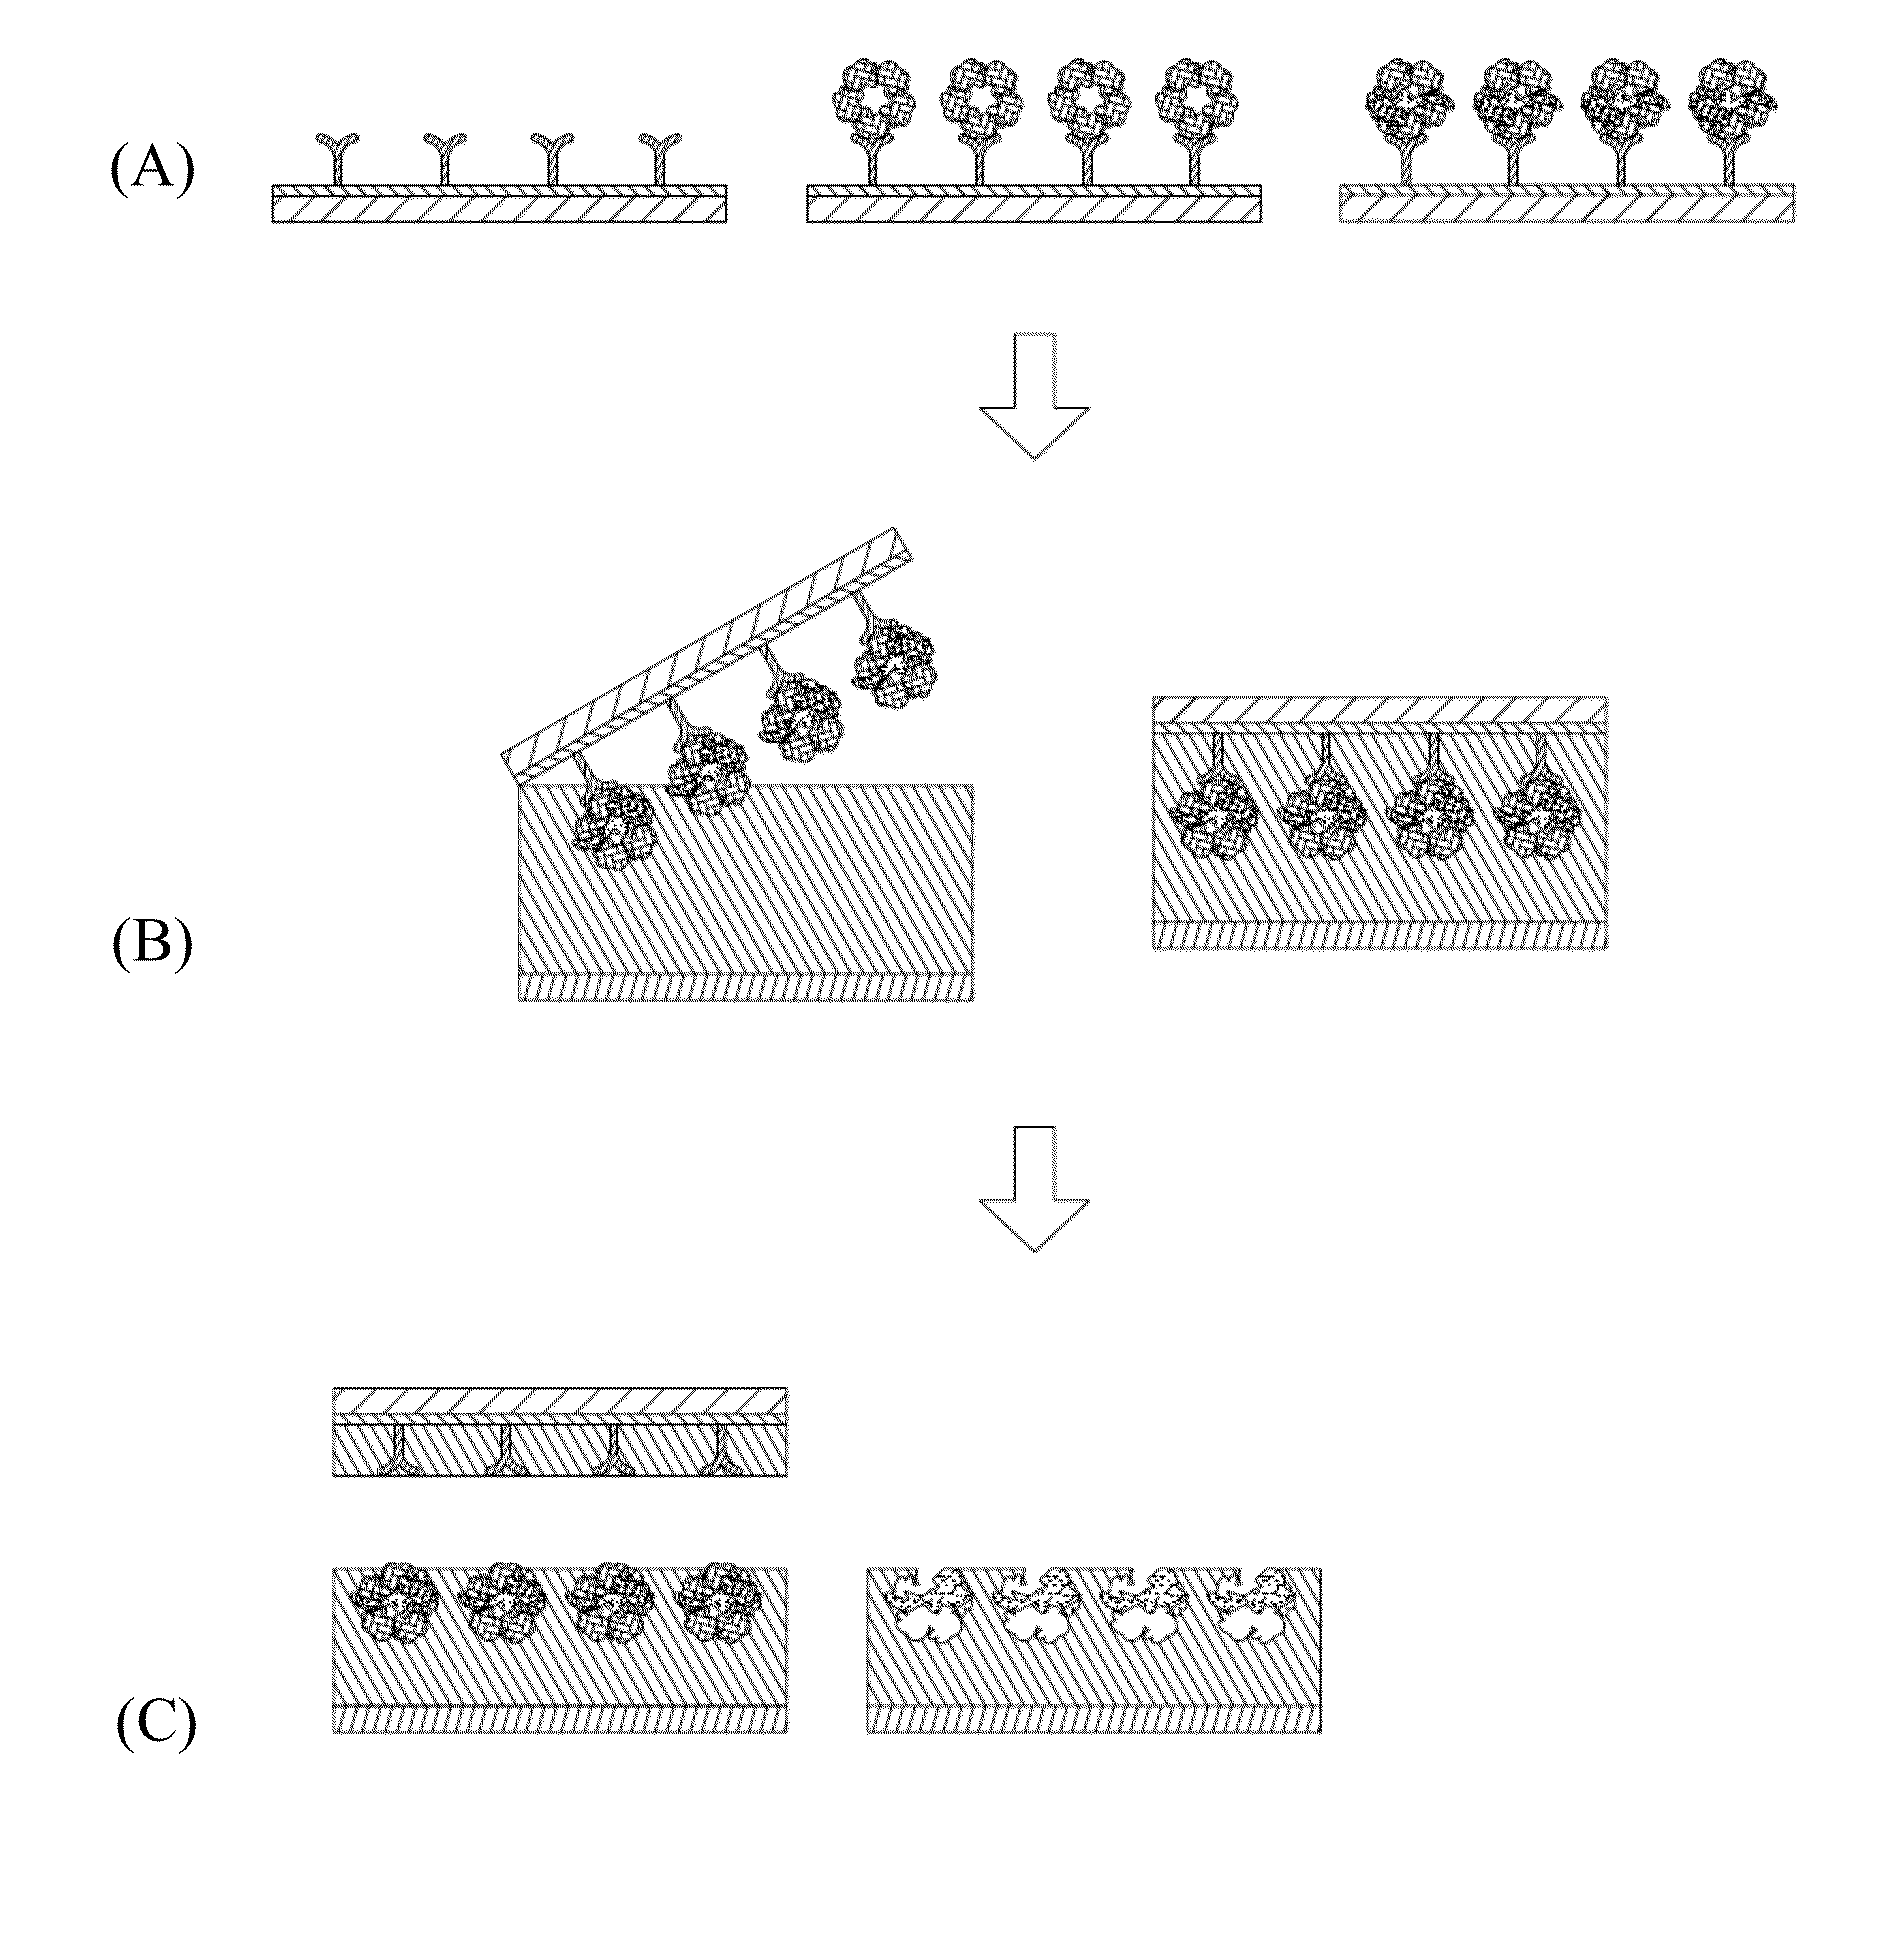 C-reactive protein imprinted polymer film and microchip system utilizing the same